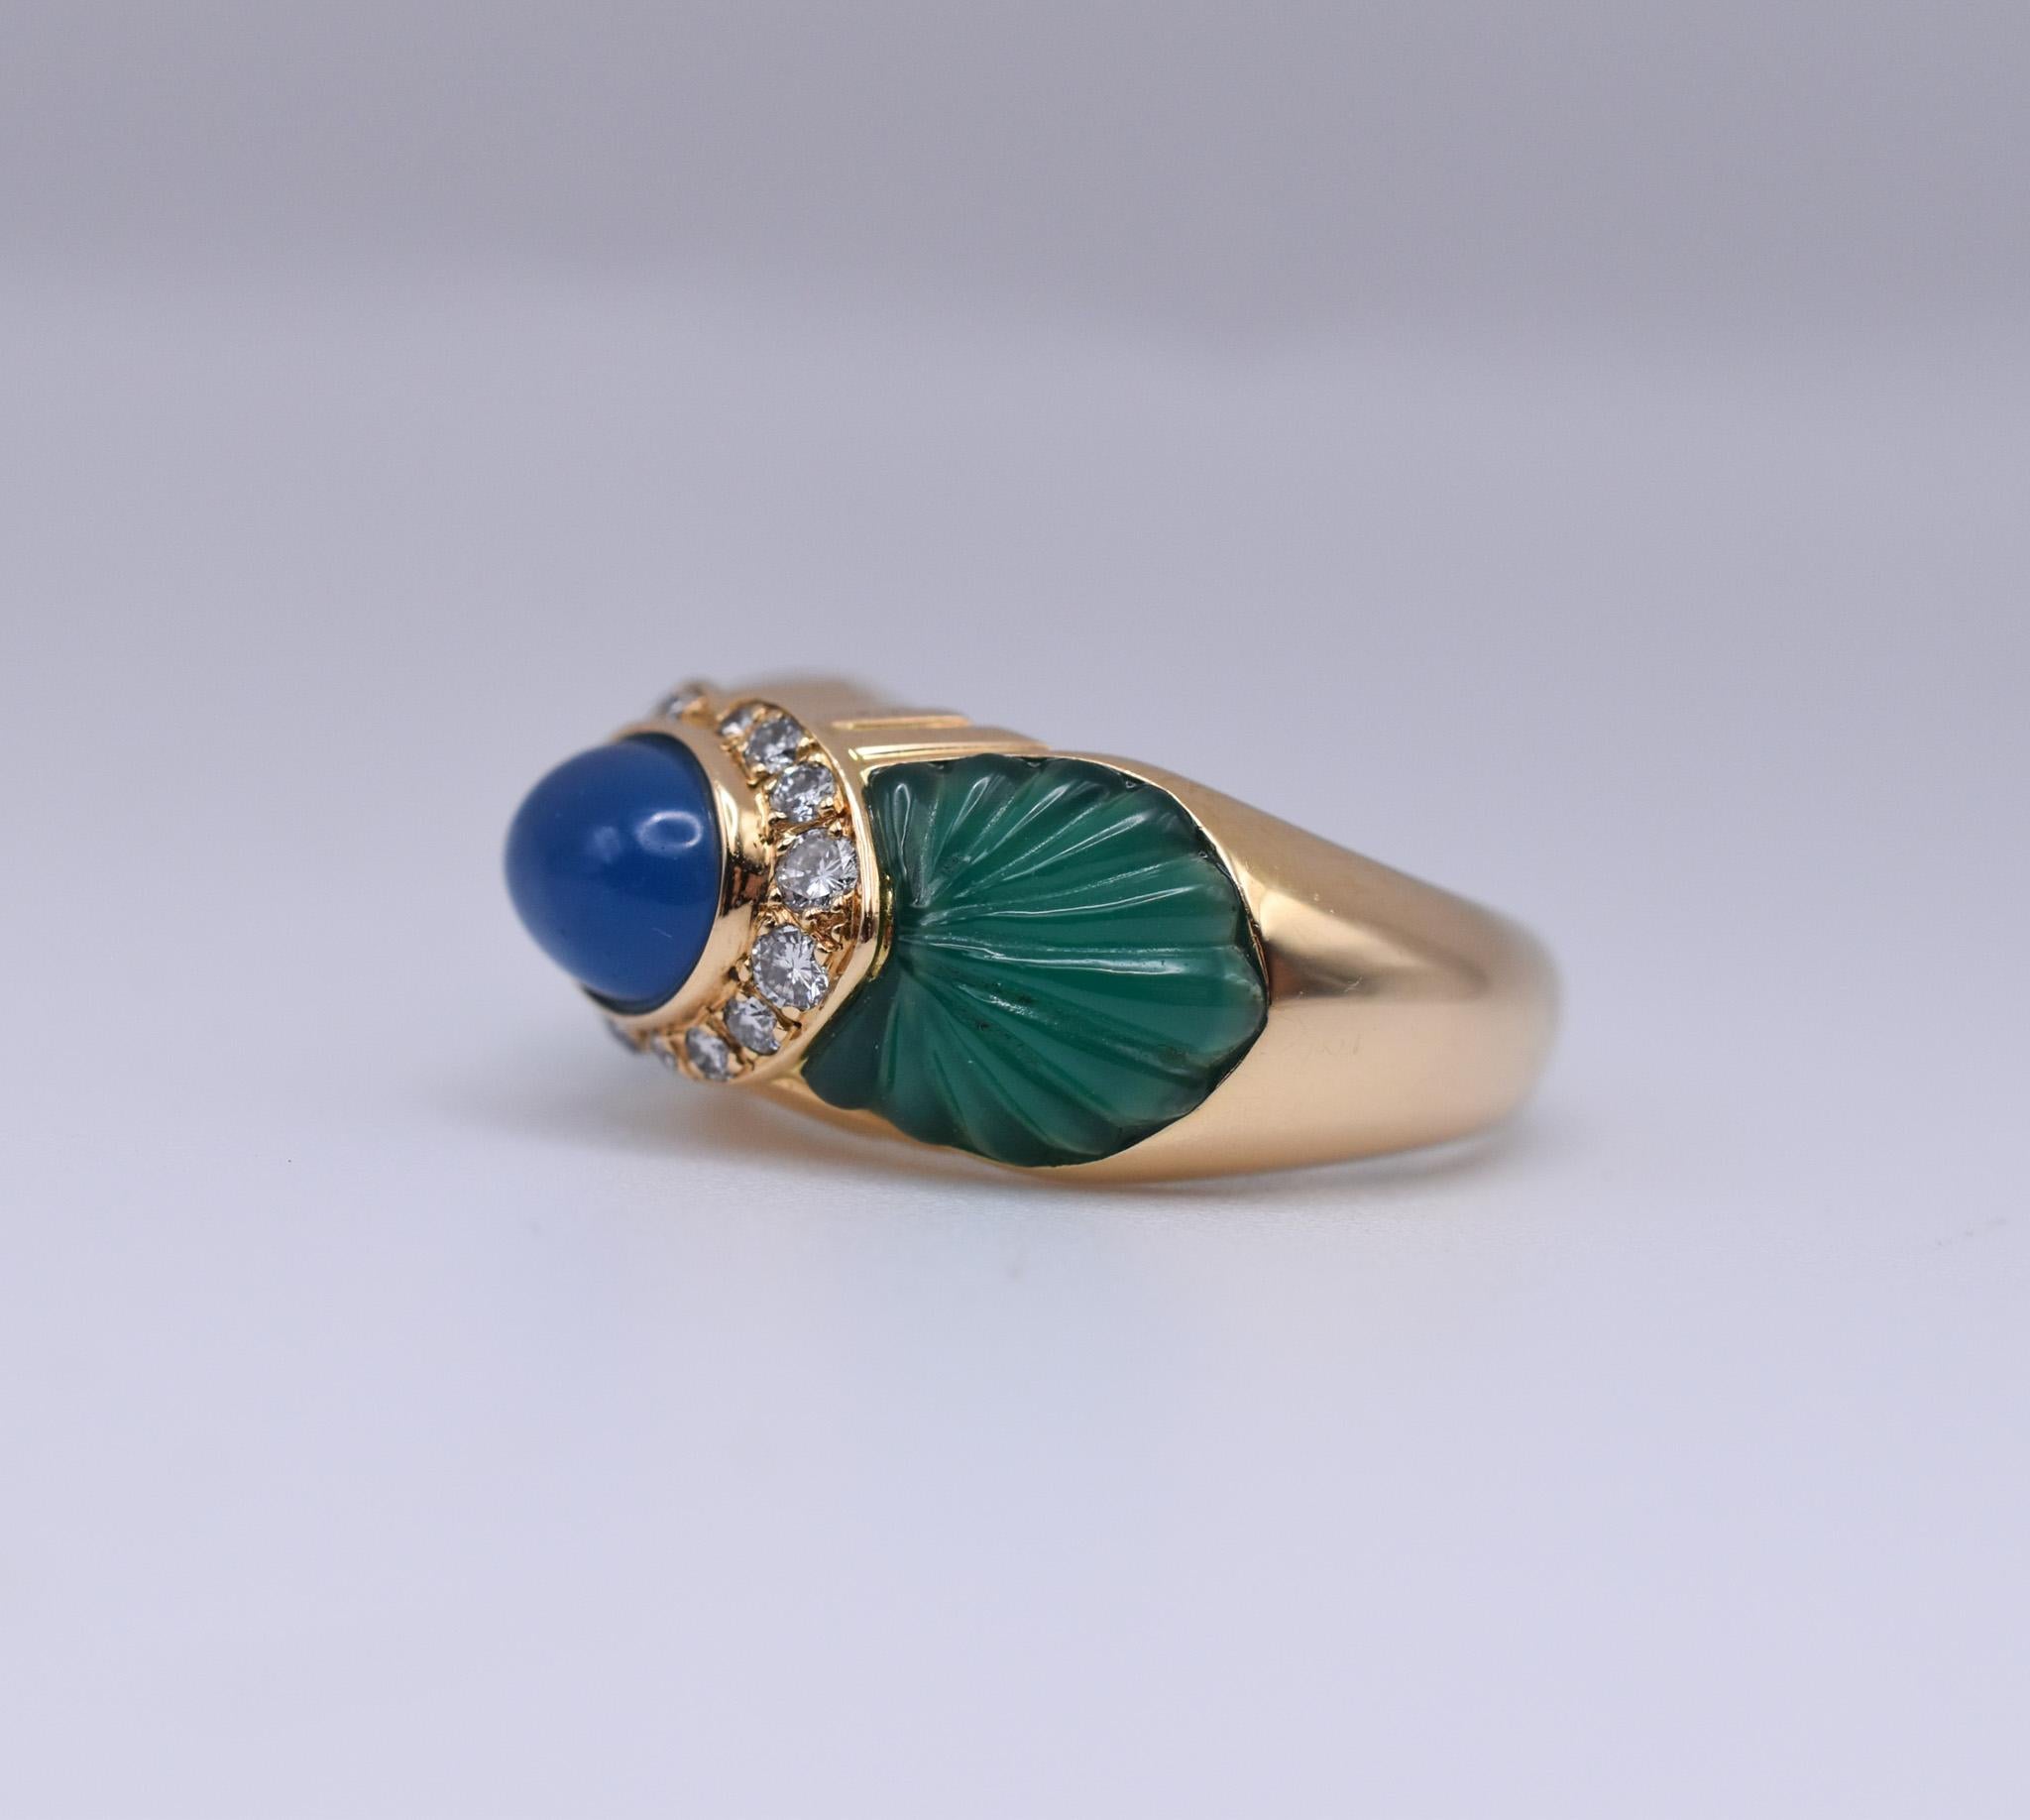 Vintage Cartier 18k Gold Sapphire, Chrysoprase and Diamond Ring, c. 1980 In Excellent Condition For Sale In New York, NY